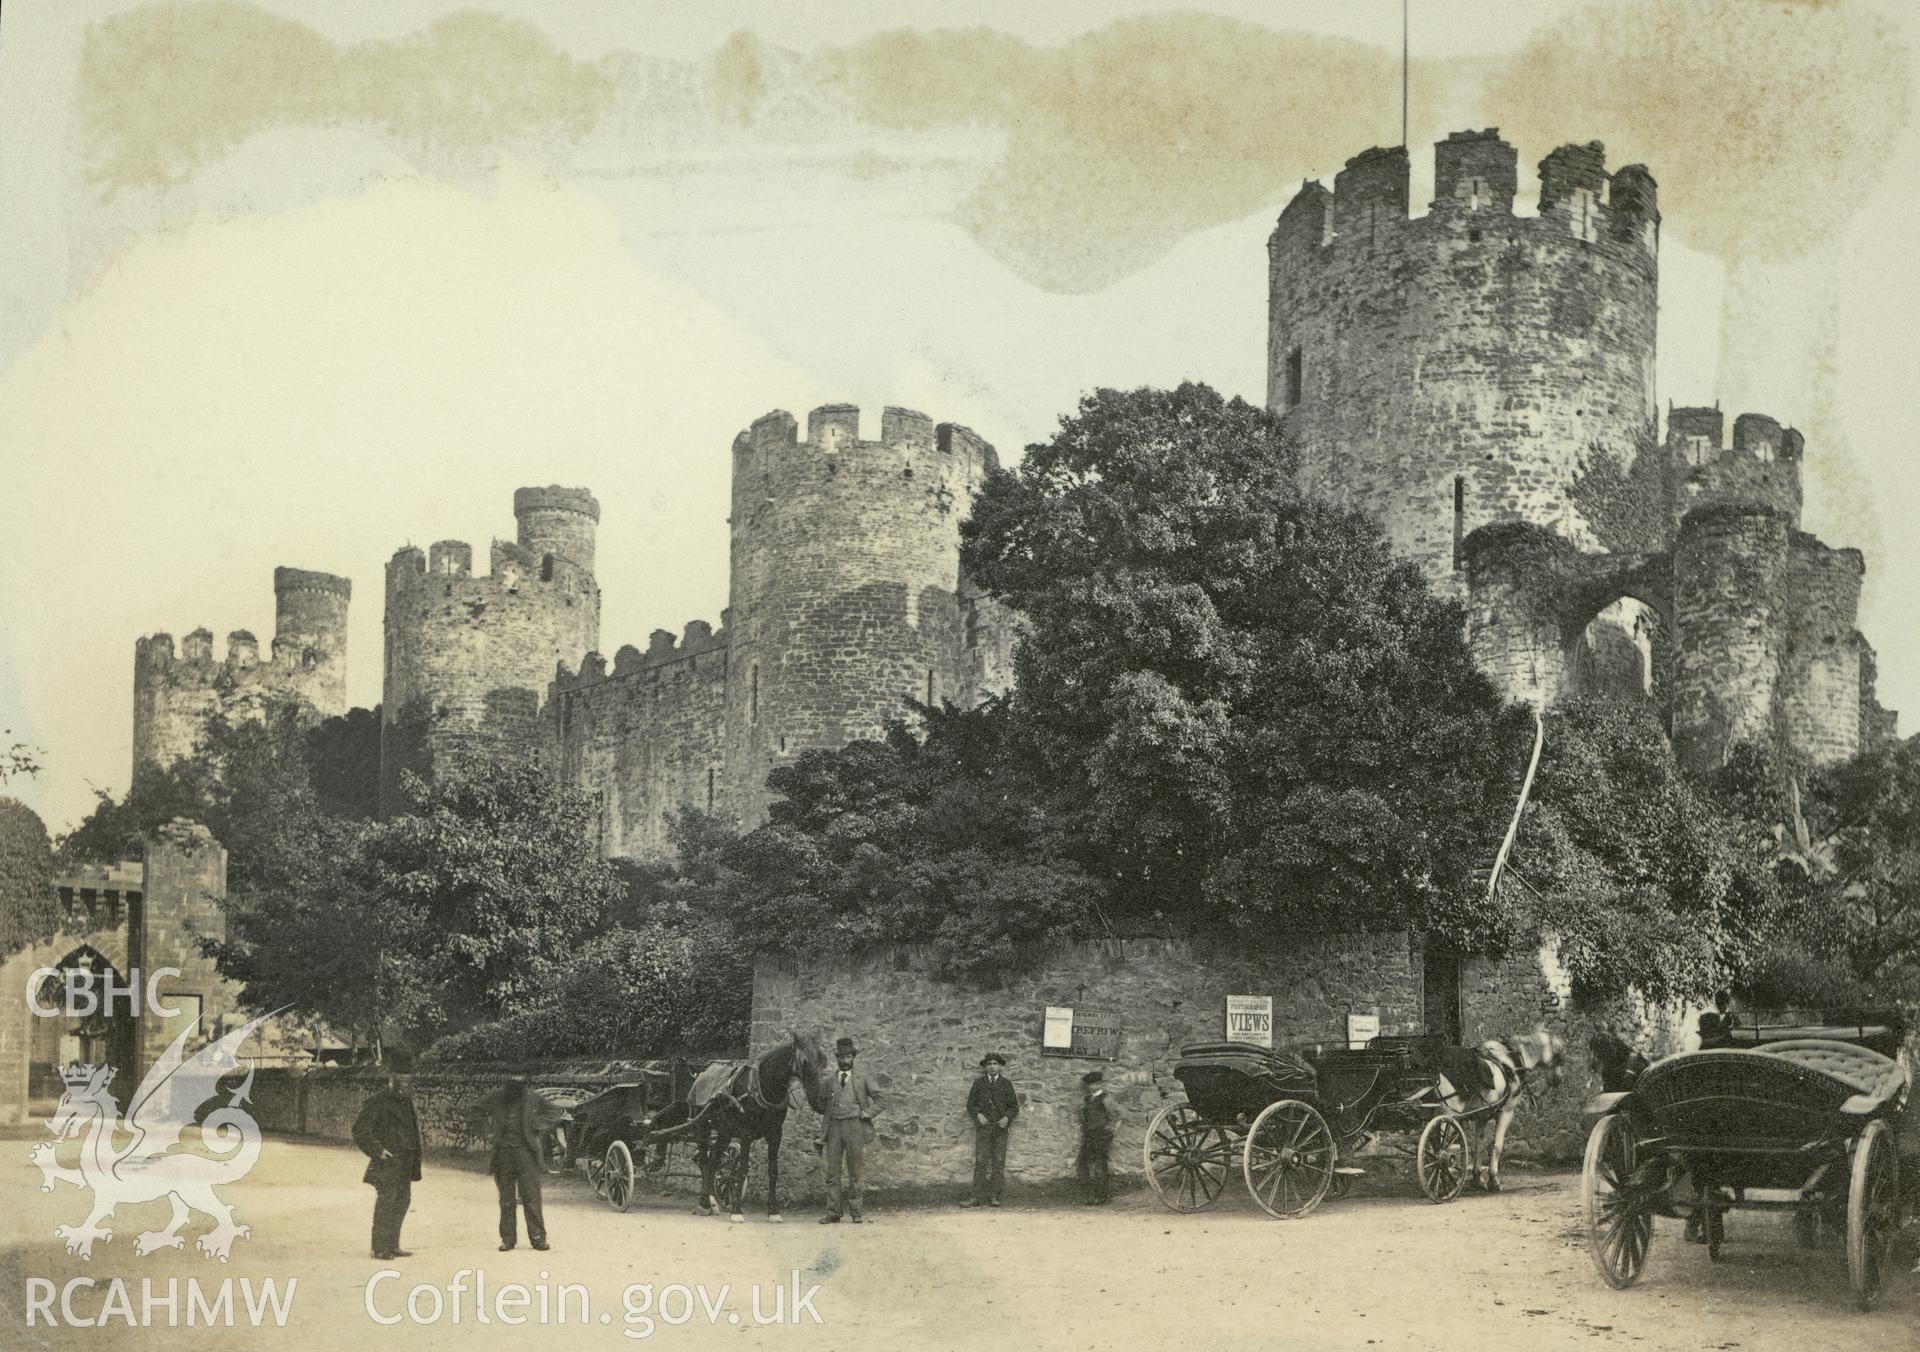 Digital copy of an albumen print showing an early view of Conway Castle.